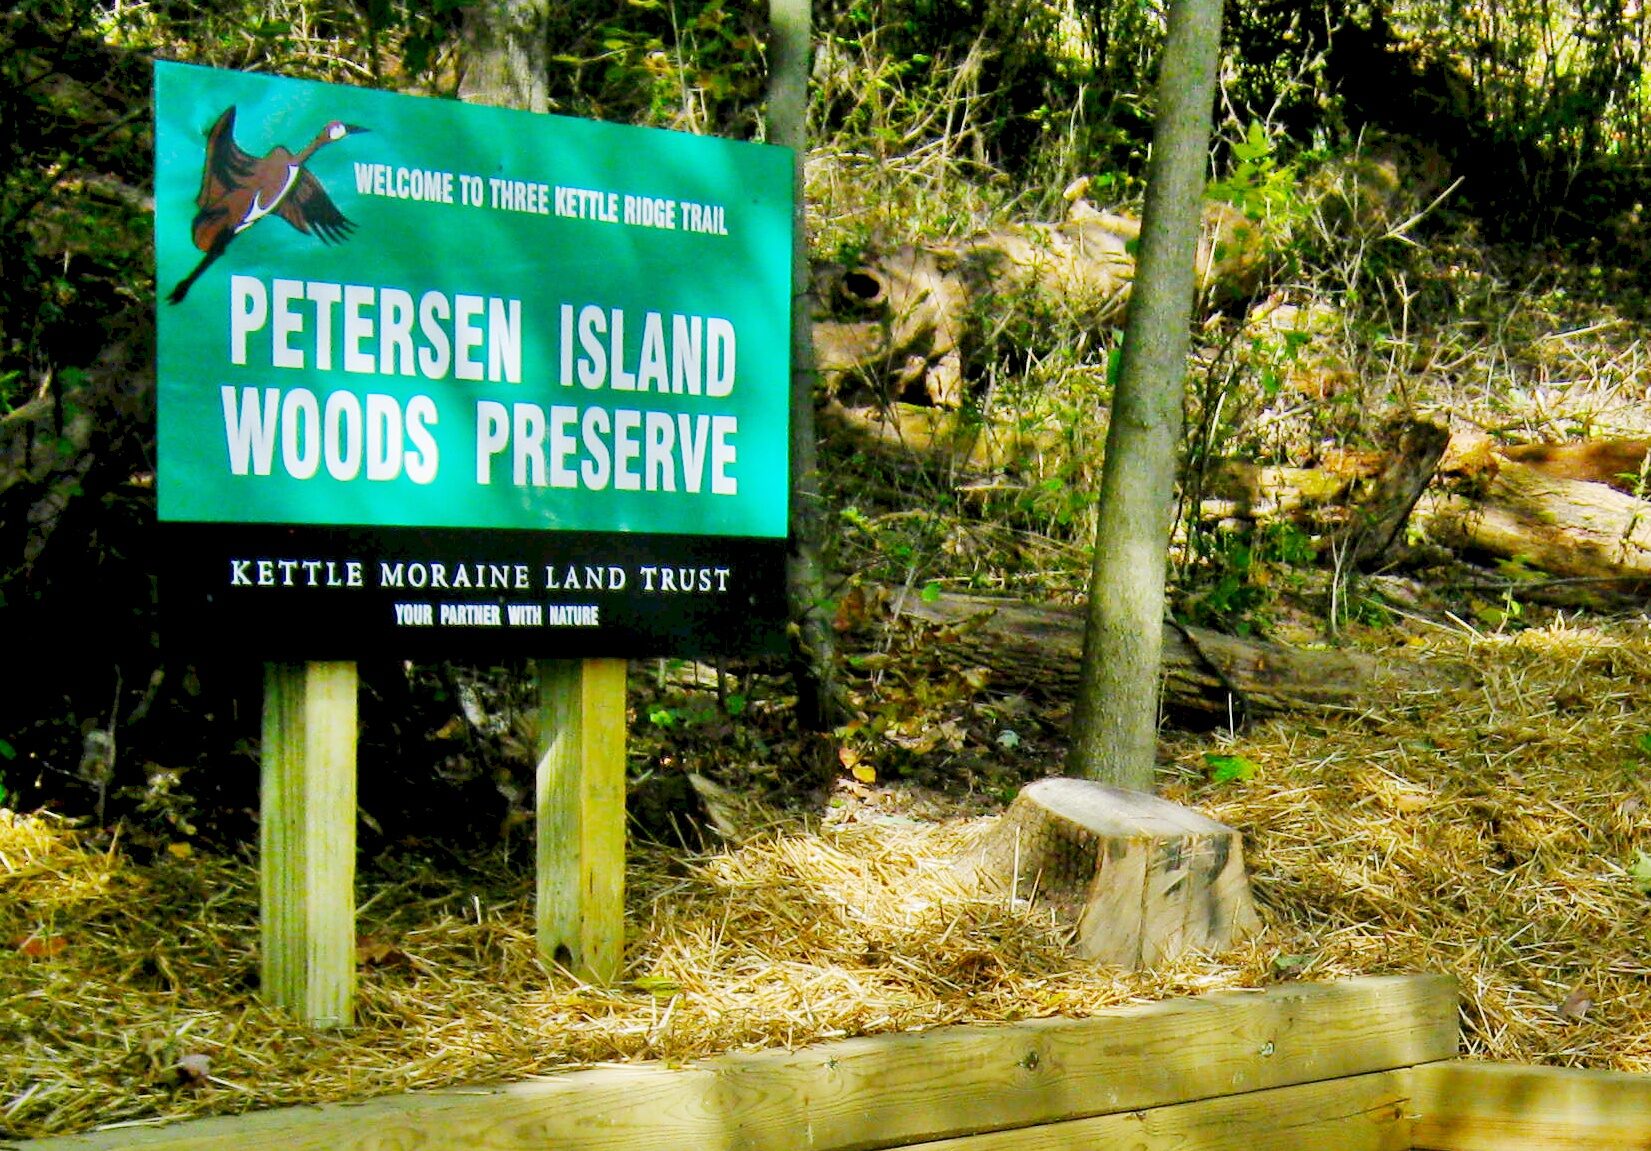 Green park sign for the Peterson Island Wood Preserve